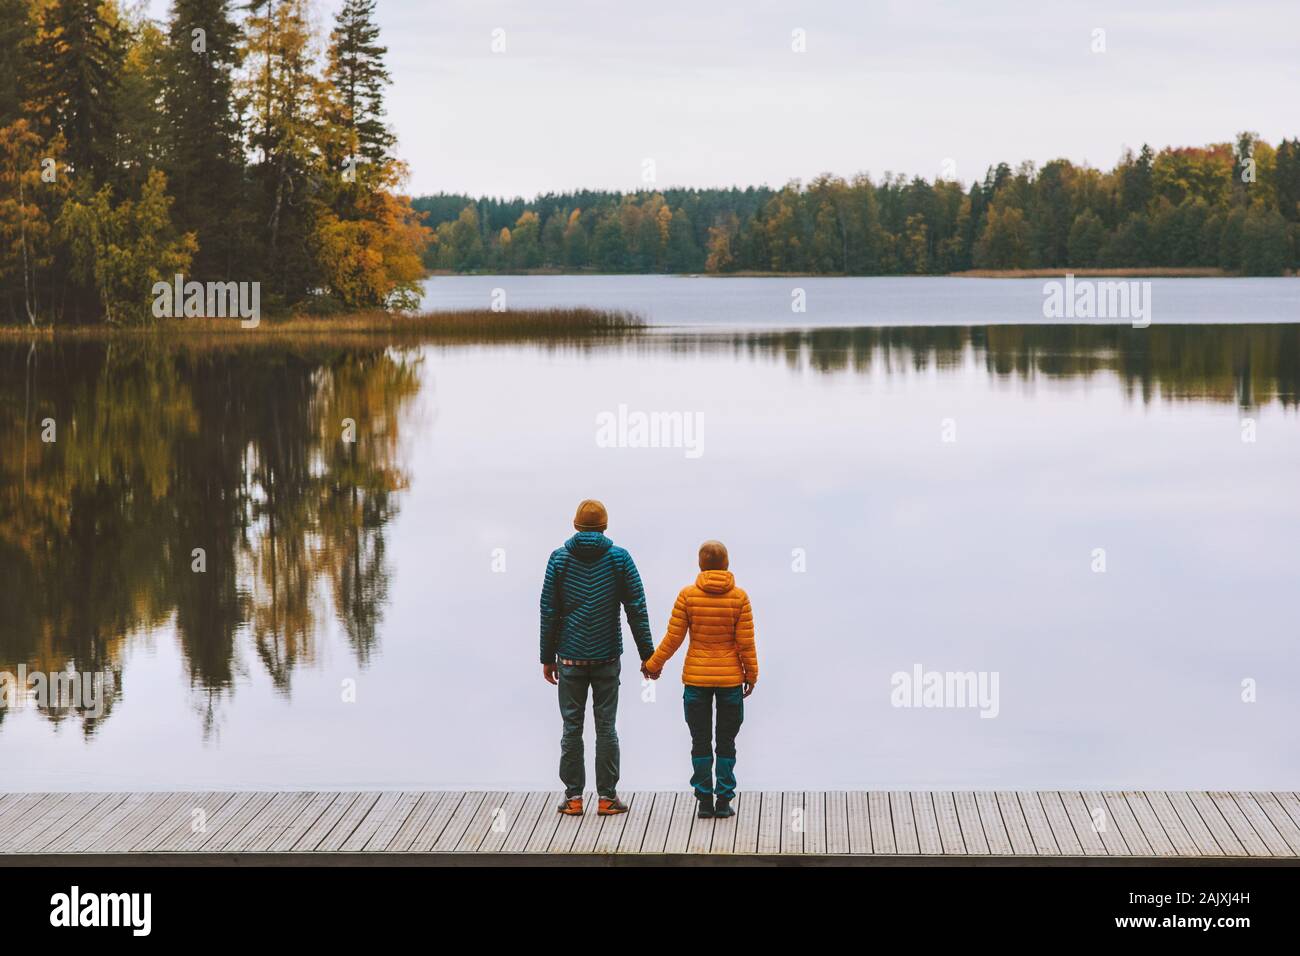 Couple in love holding hands romantic dating family lifestyle relationship man and woman standing on pier outdoor enjoying lake and autumn forest land Stock Photo